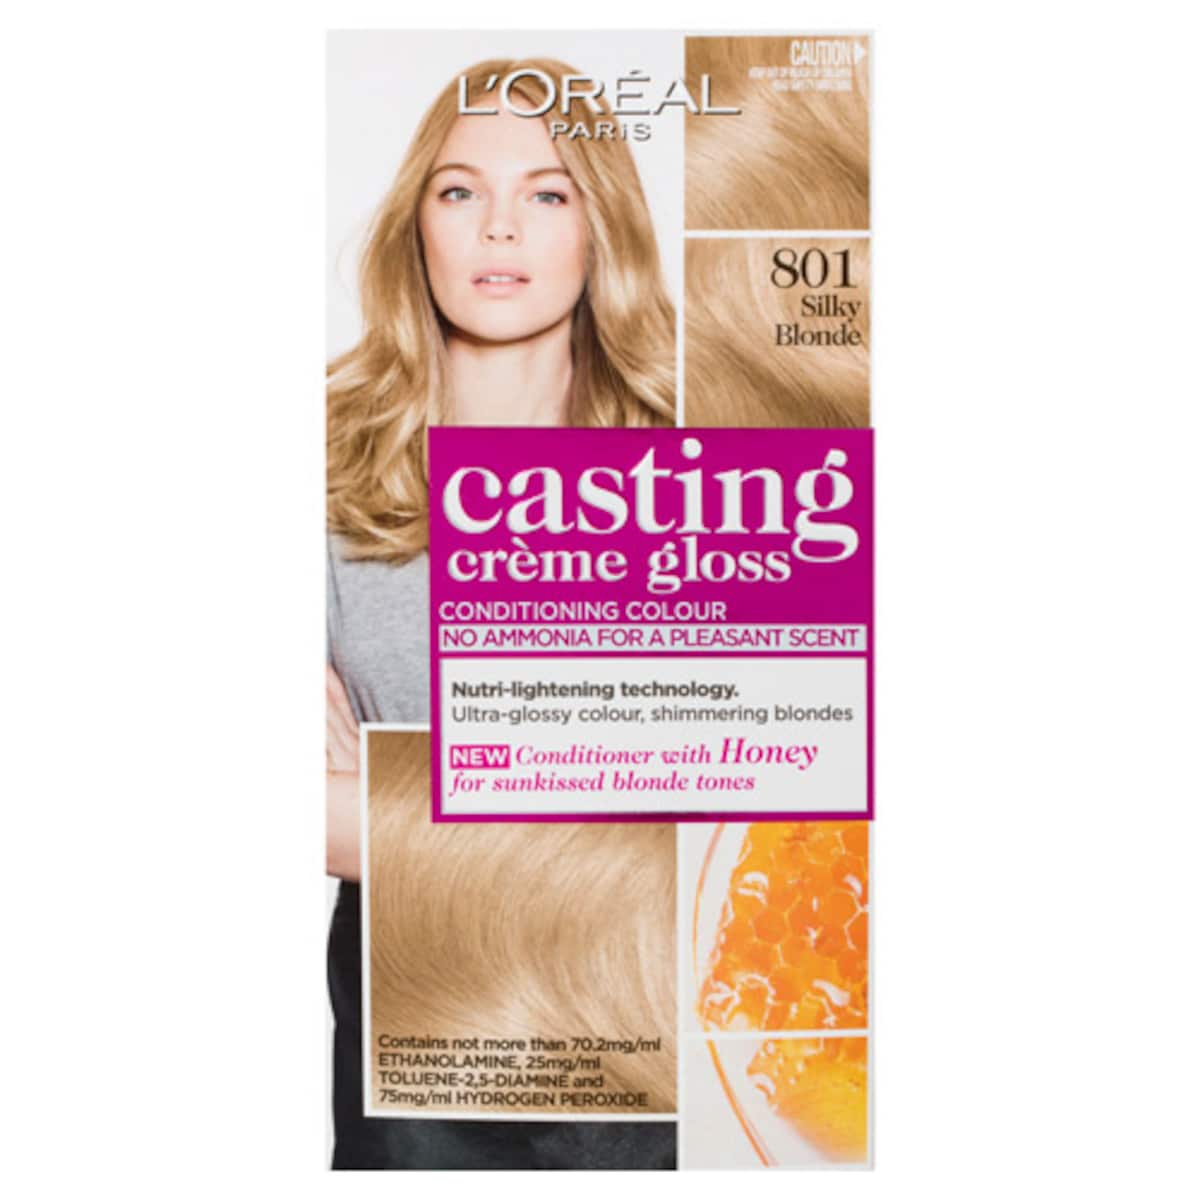 L'Oreal Casting Creme Gloss 801 Silky Blonde Hair Colour